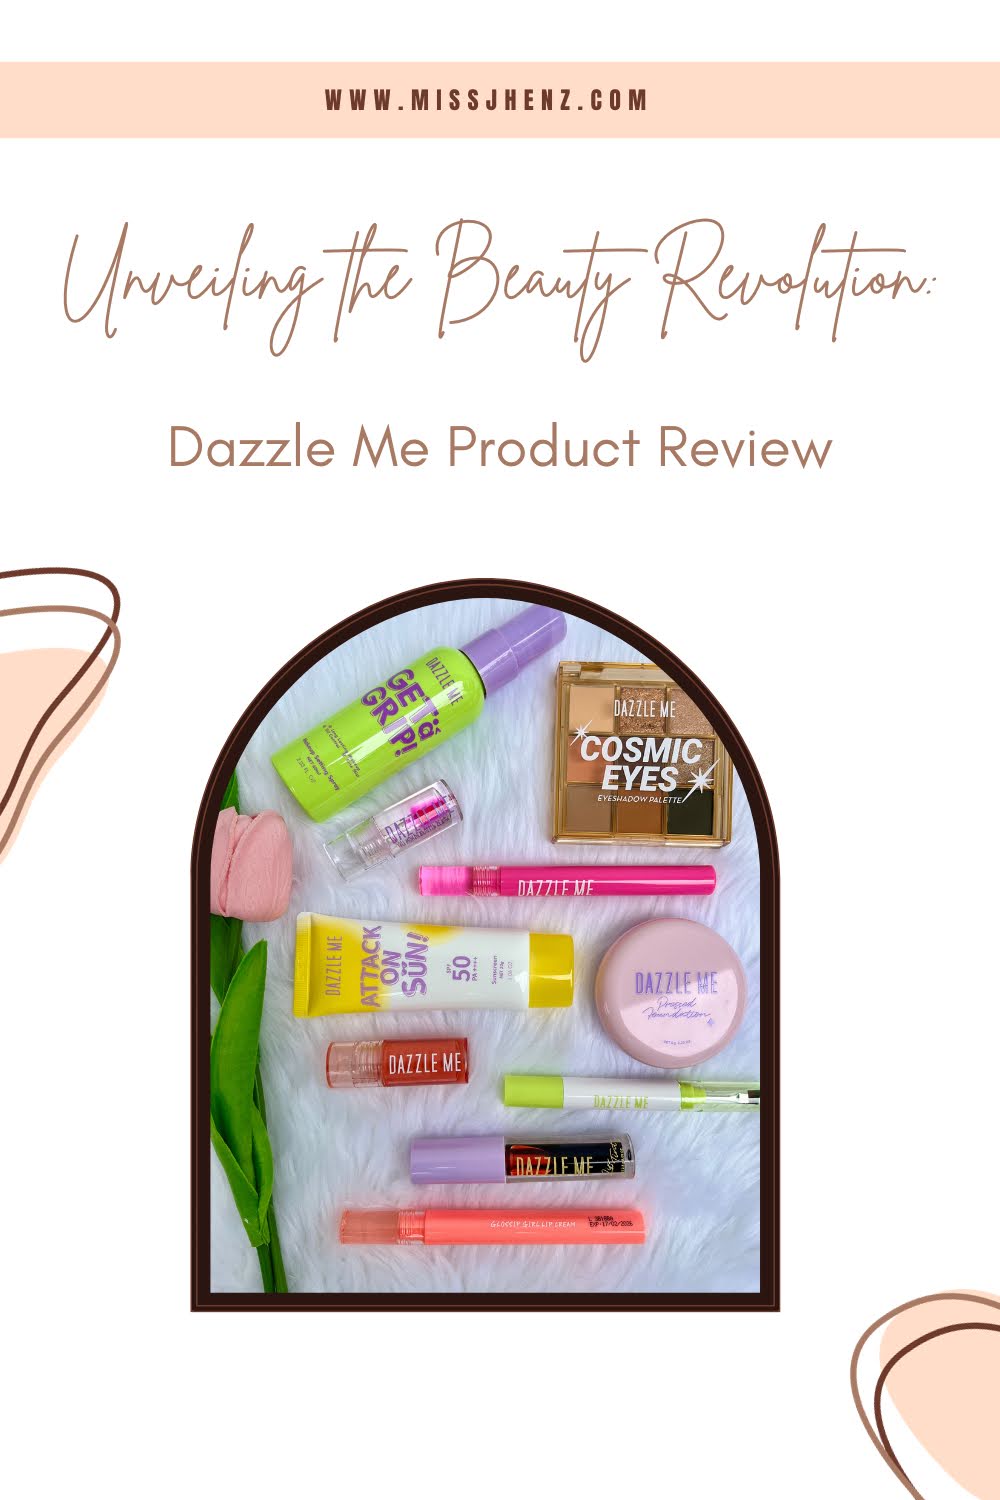 Unveiling the Beauty Revolution: Dazzle Me Product Review